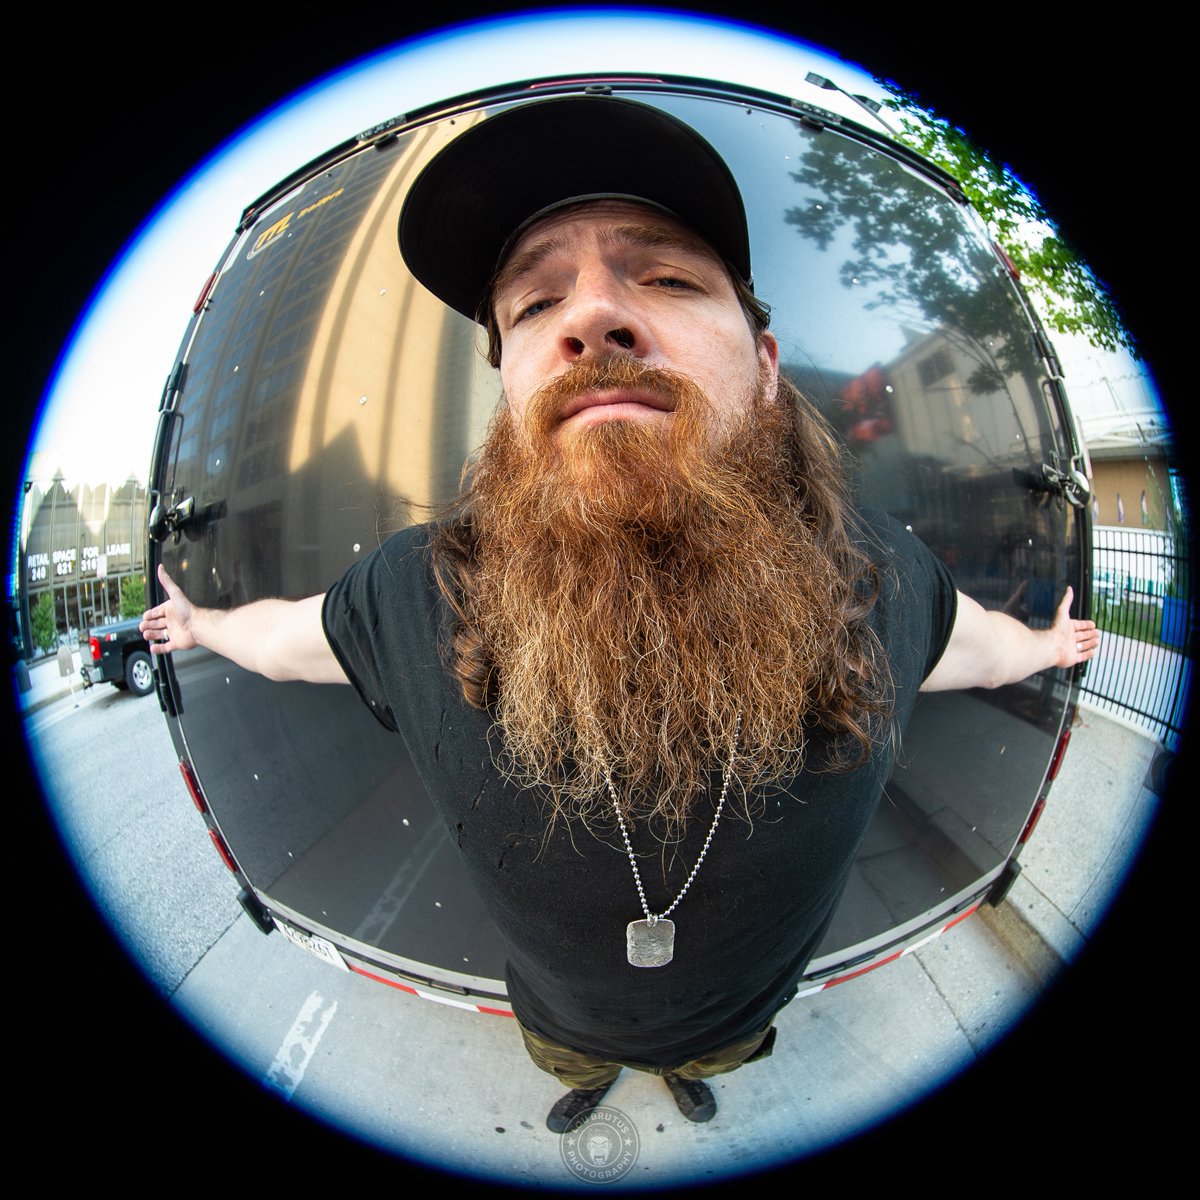 VIVA MONTANA! It was great to see @TimMontana on the bill for the @98Rock Spring Fling in Baltimore MD. Here's a fisheye view following his kick ass set. Watch for Tim on the road and make time to catch him. Viva Montana! #TimMontana